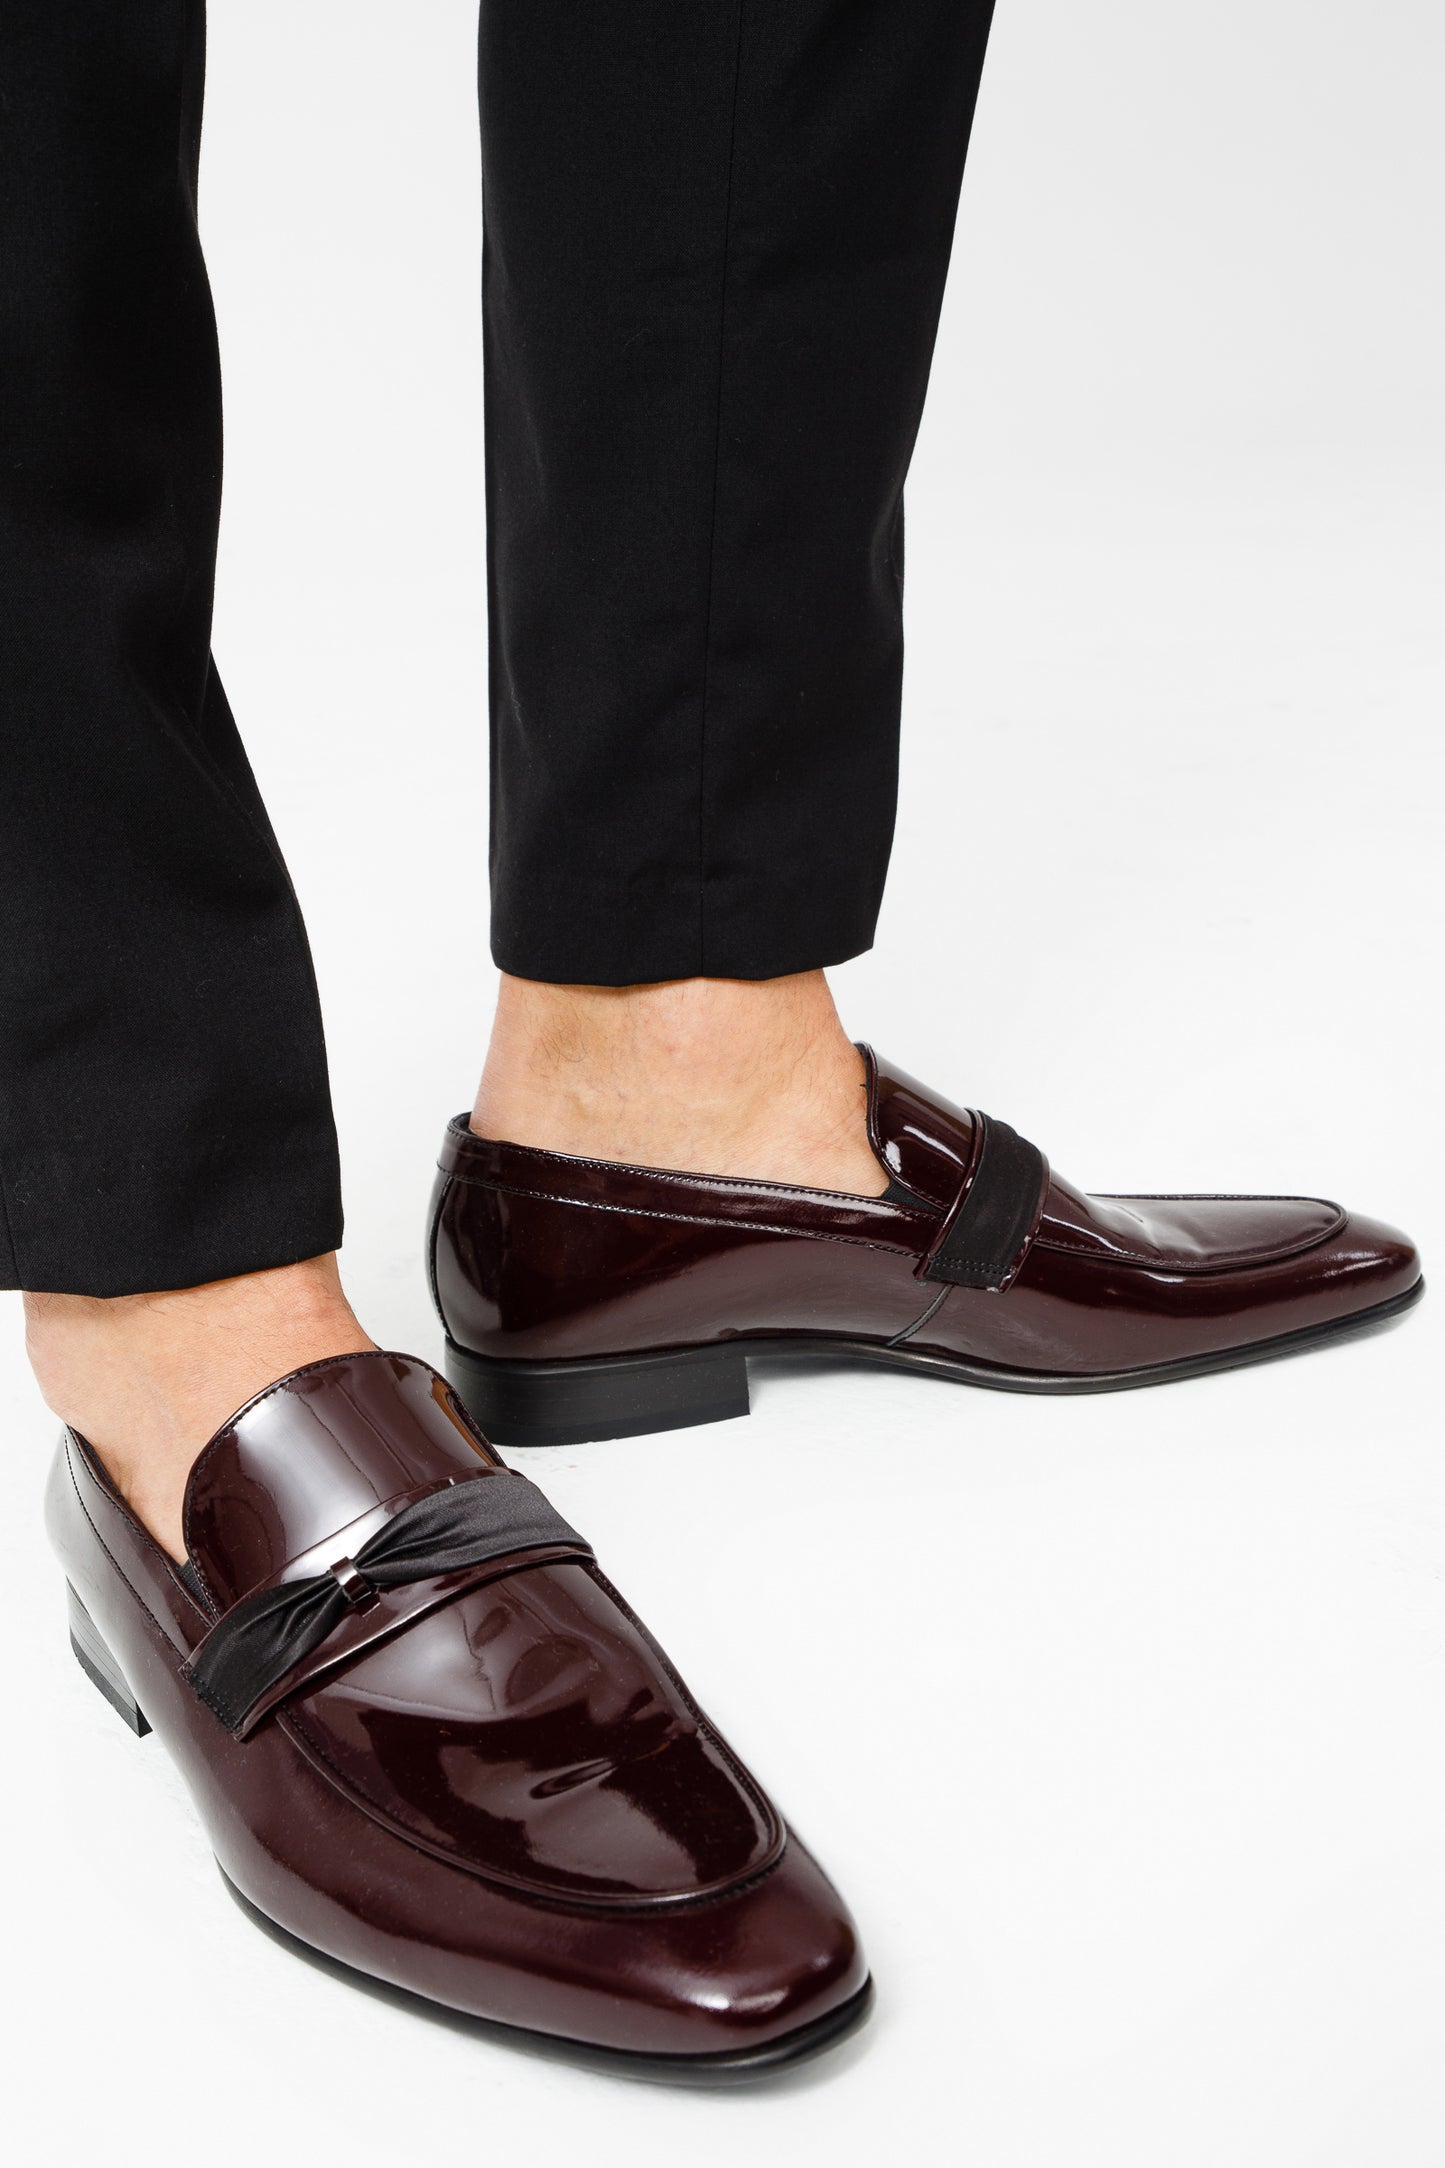 The Dodoma Burgundy Patent Leather Loafer Men Shoe